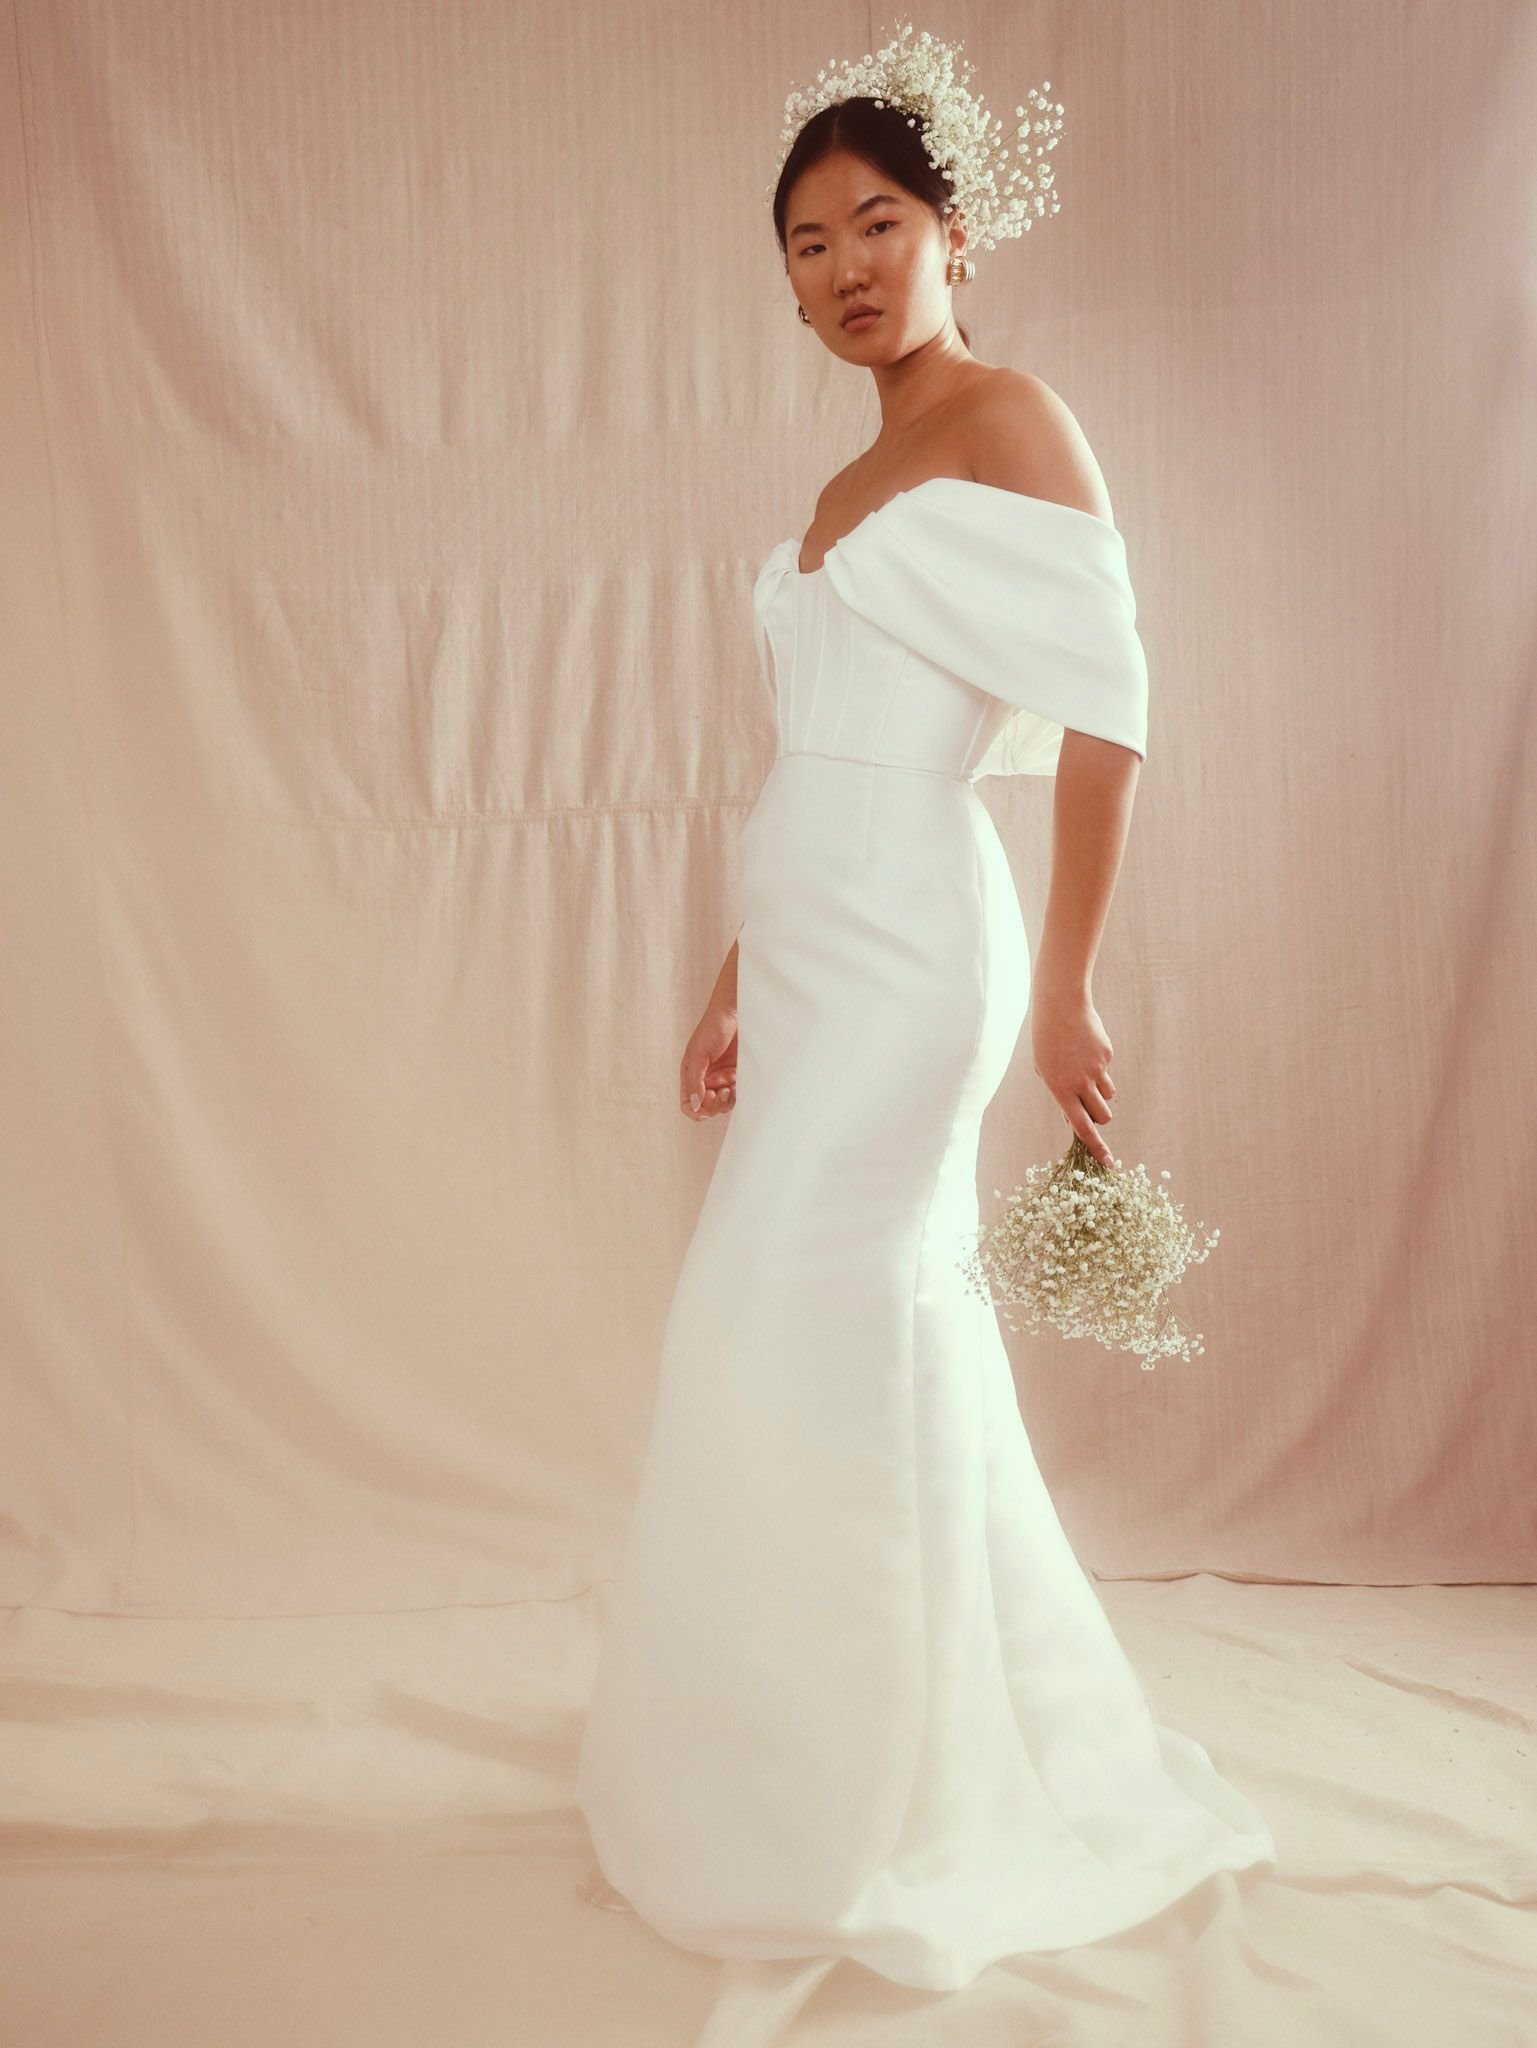 blanc-de-blanc-bridal-boutique-pittsburgh-cleveland-dress-wedding-gown-house-of-renhue-anderson-shawl-front.jpeg